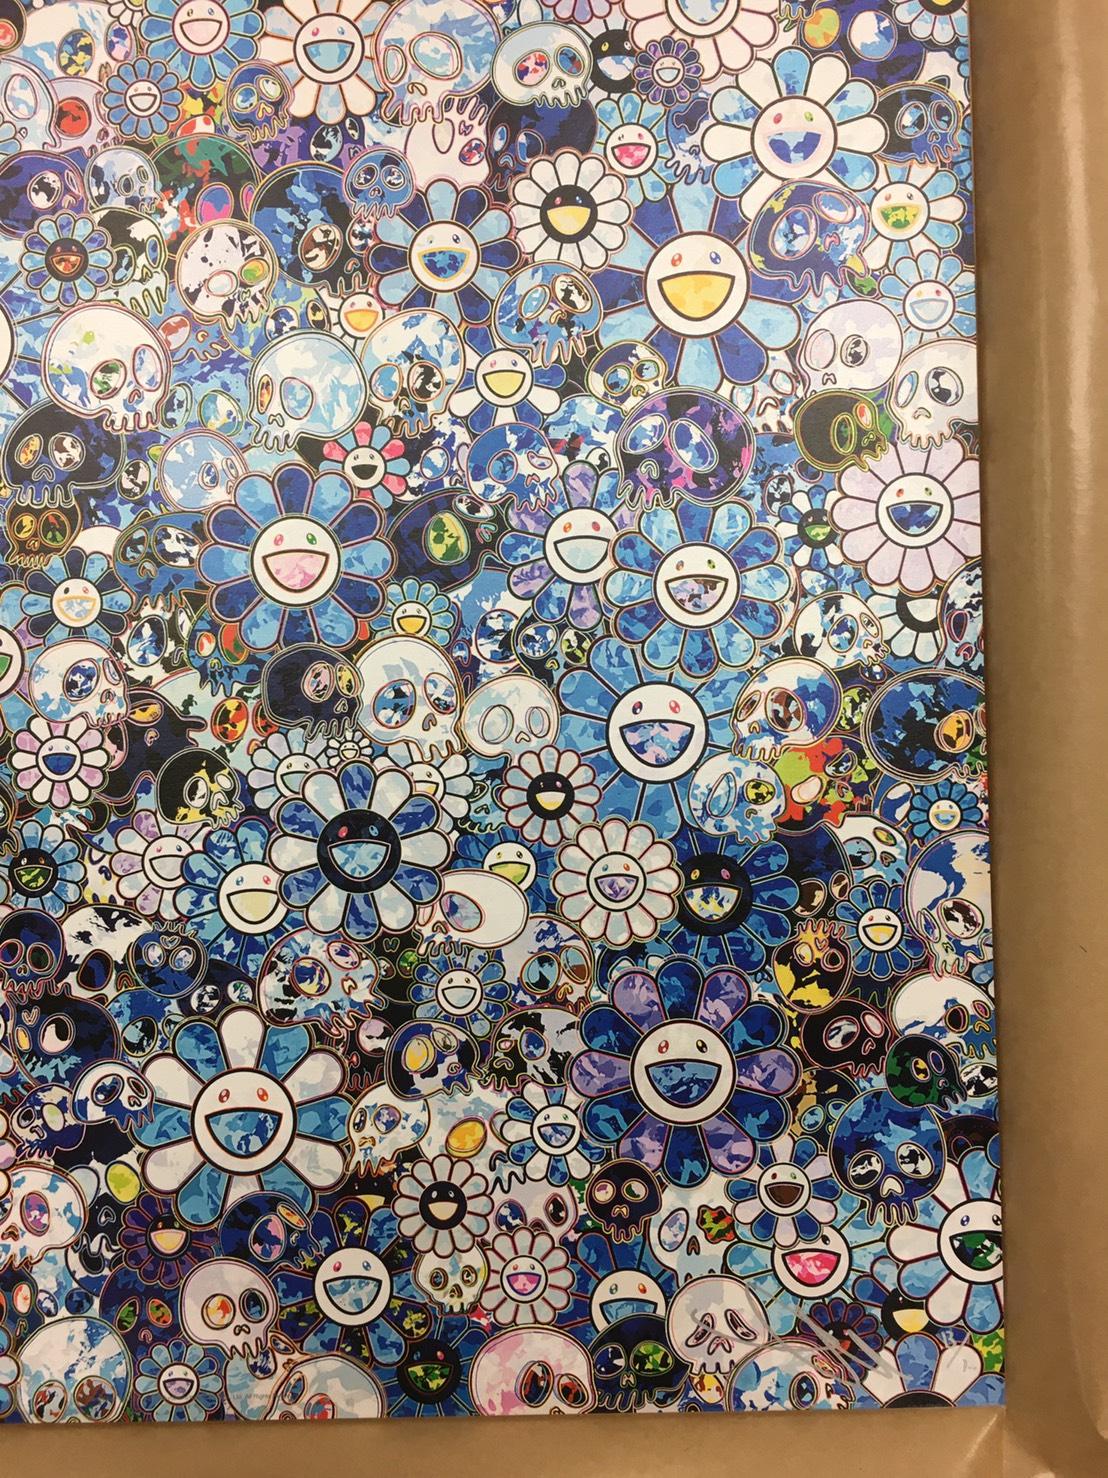 Zero-One. Limited Edition (print) by Takashi Murakami signed and numbered 4